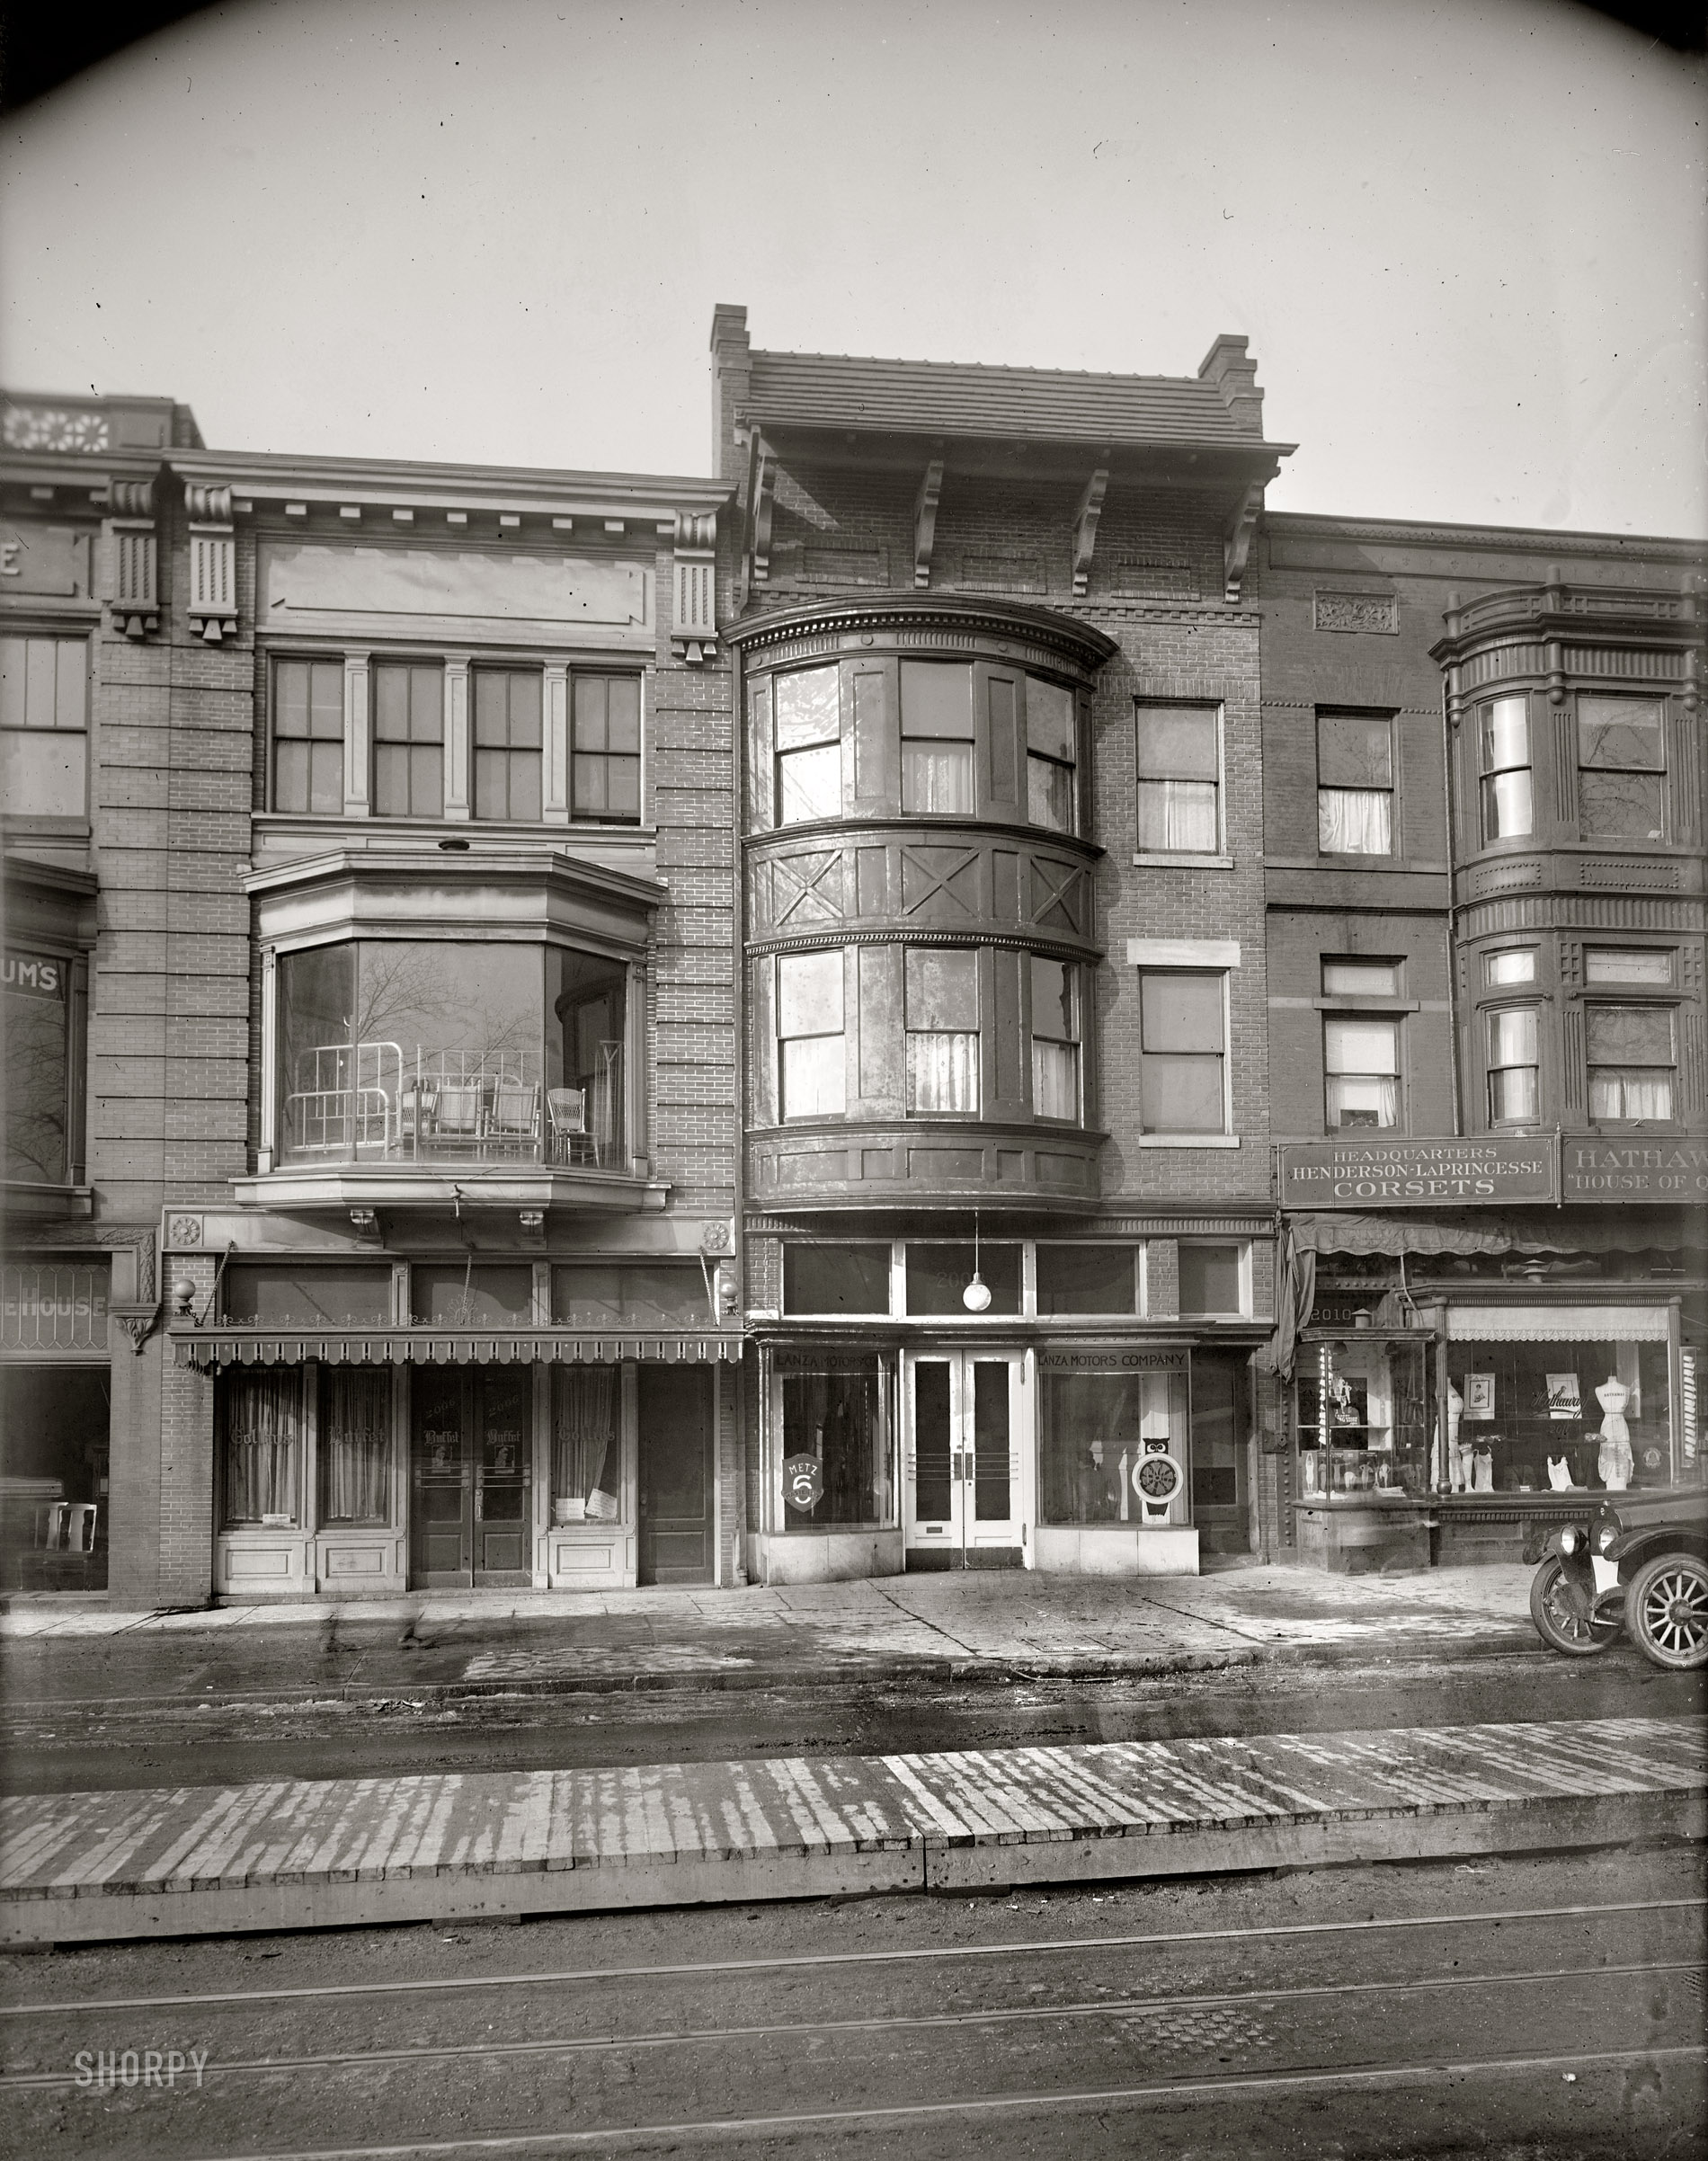 Washington, D.C., circa 1920. "Lanza Motors Co., exterior, 14th Street." Lanza Motors sold a car called the Metz; neither would be long for this world -- a world whose sidewalks were trod by ectoplasmic pedestrians. View full size.